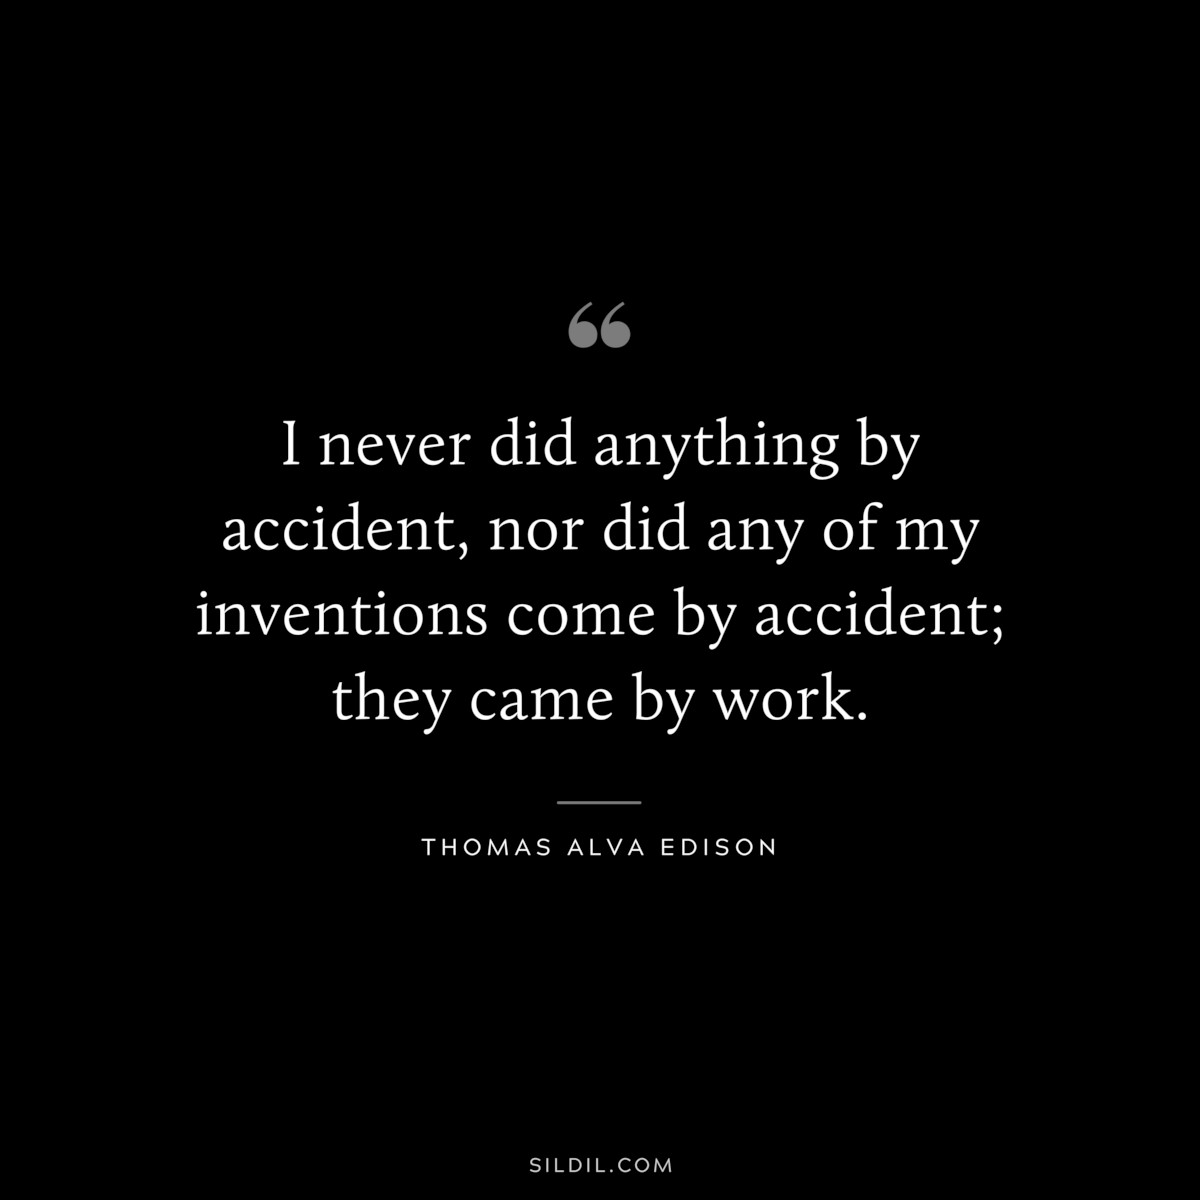 I never did anything by accident, nor did any of my inventions come by accident; they came by work. ― Thomas Alva Edison